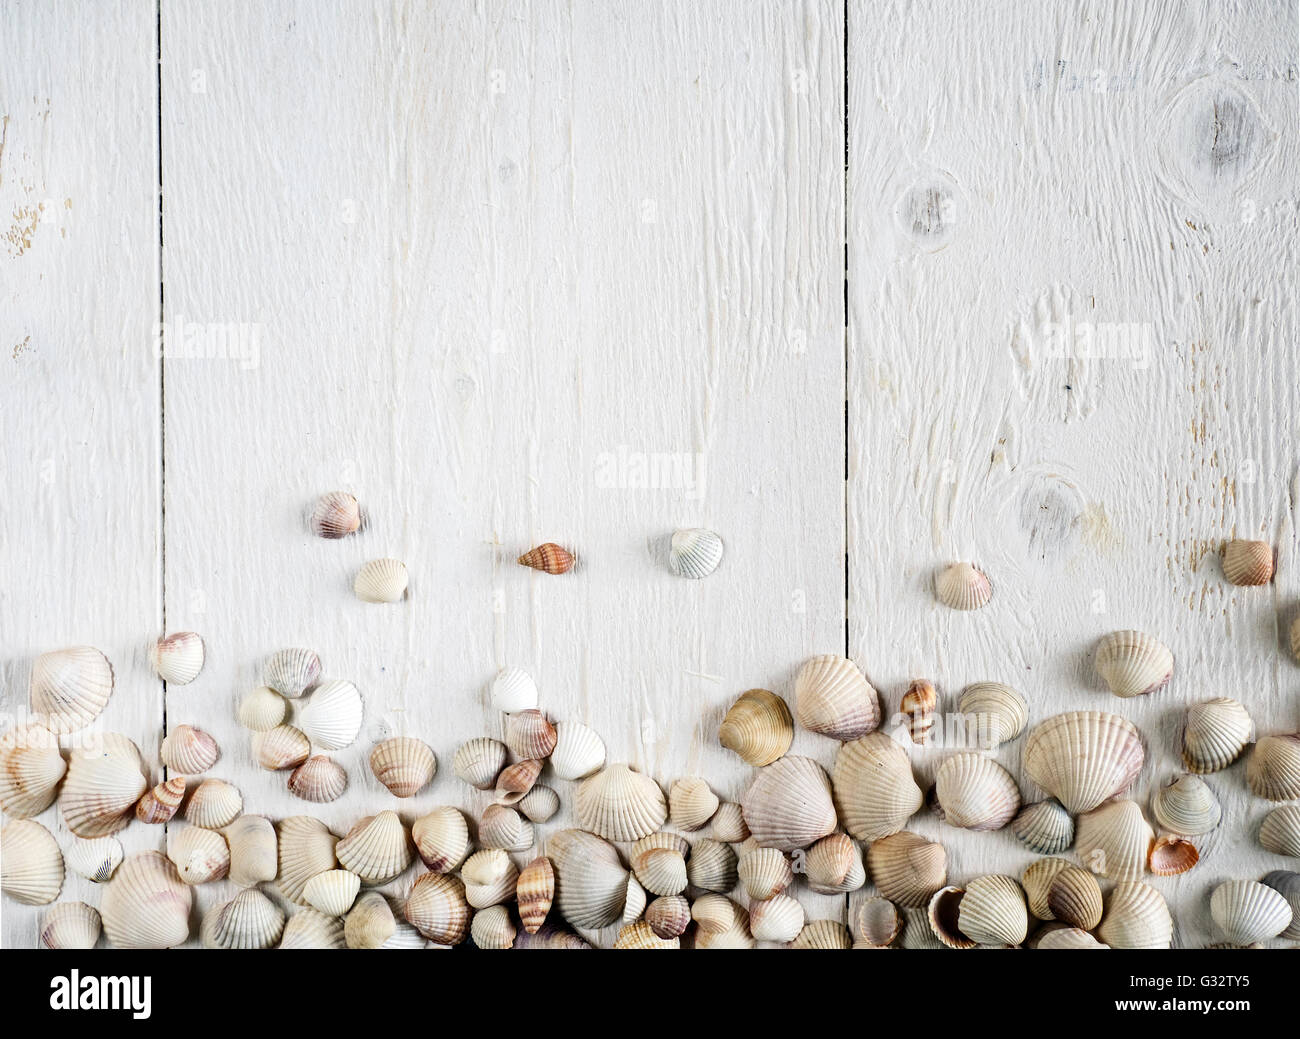 Sea shells on a wooden table Stock Photo